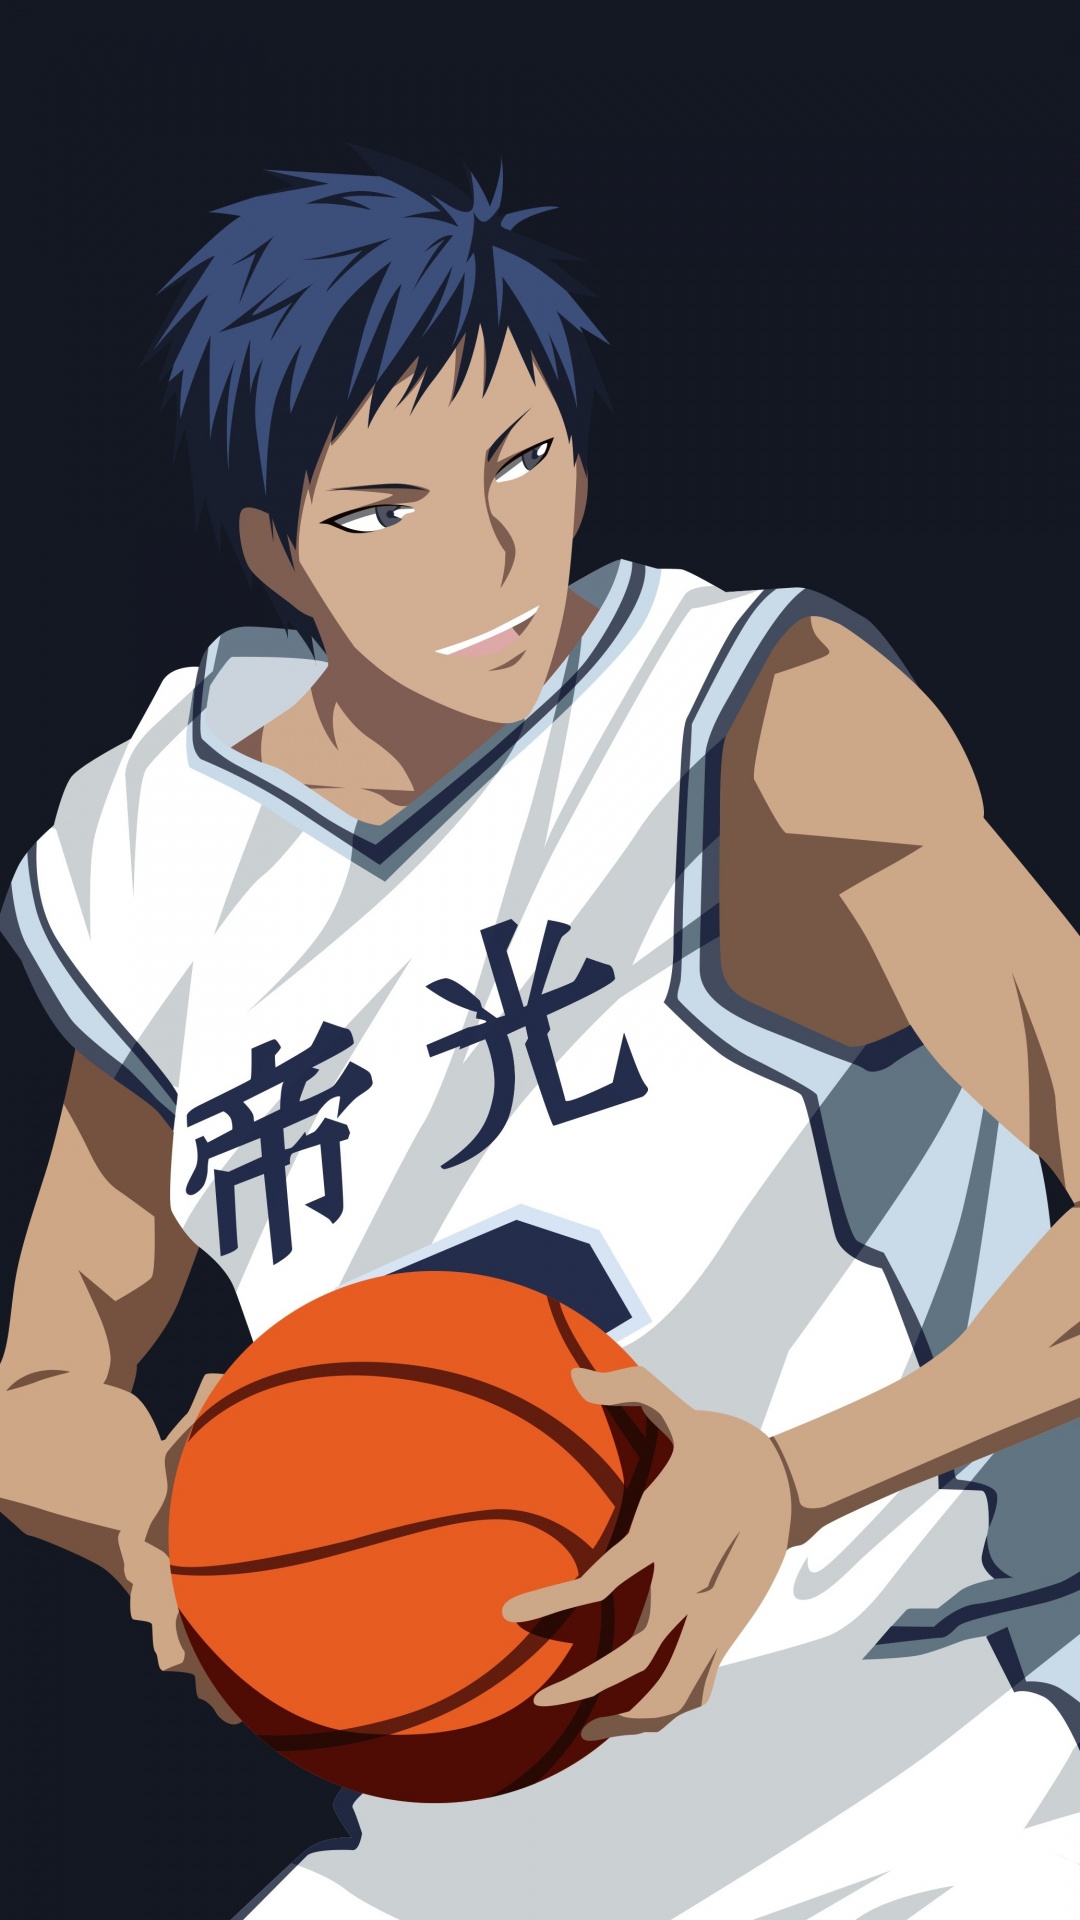 Personnage D'anime Masculin Aux Cheveux Noirs Tenant le Basket-ball. Wallpaper in 1080x1920 Resolution